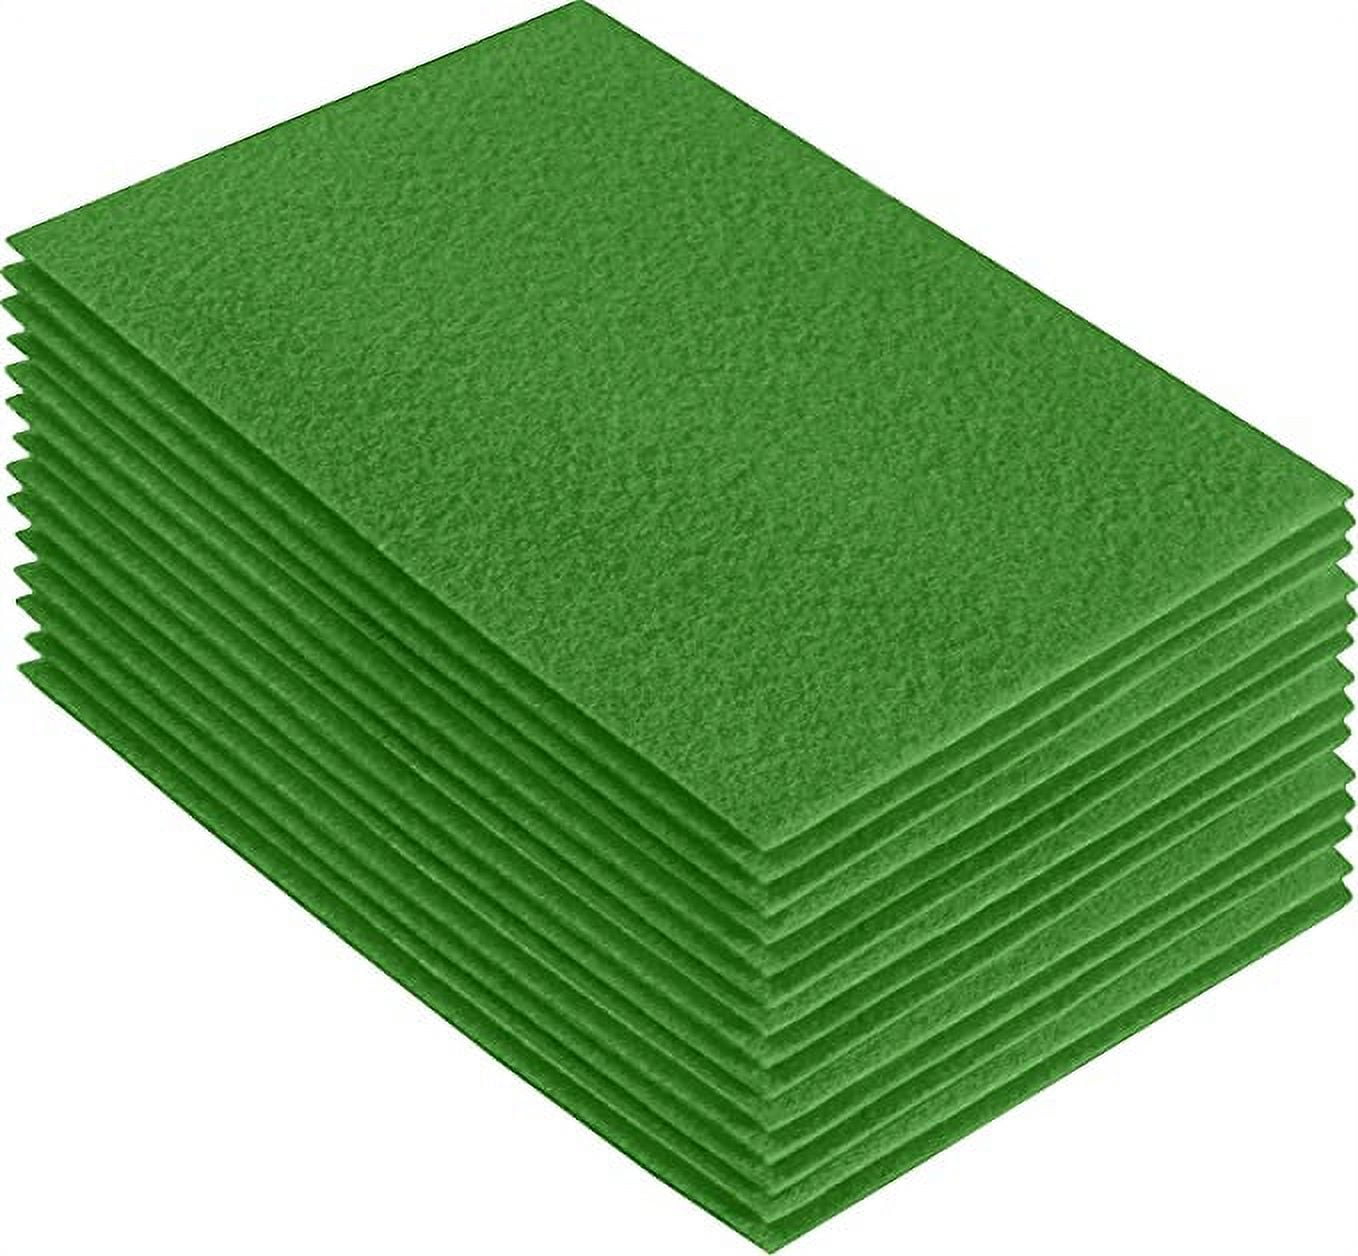 Creatology Solid Green Felt Sheets 15 Piece Pack 9 X 12 Arts Crafts New